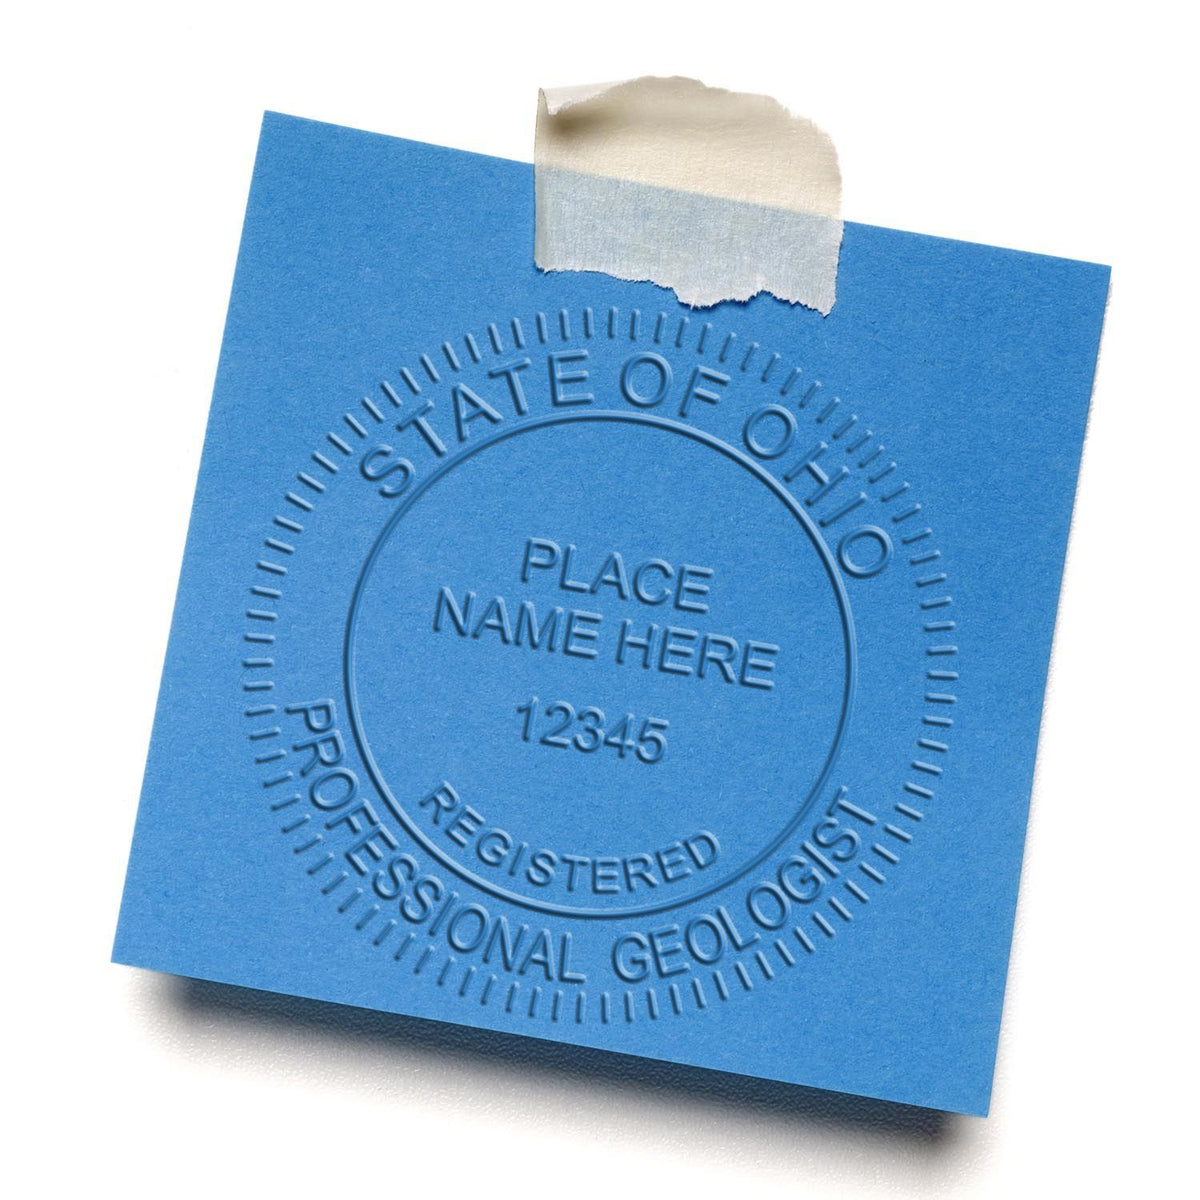 A photograph of the Soft Ohio Professional Geologist Seal stamp impression reveals a vivid, professional image of the on paper.